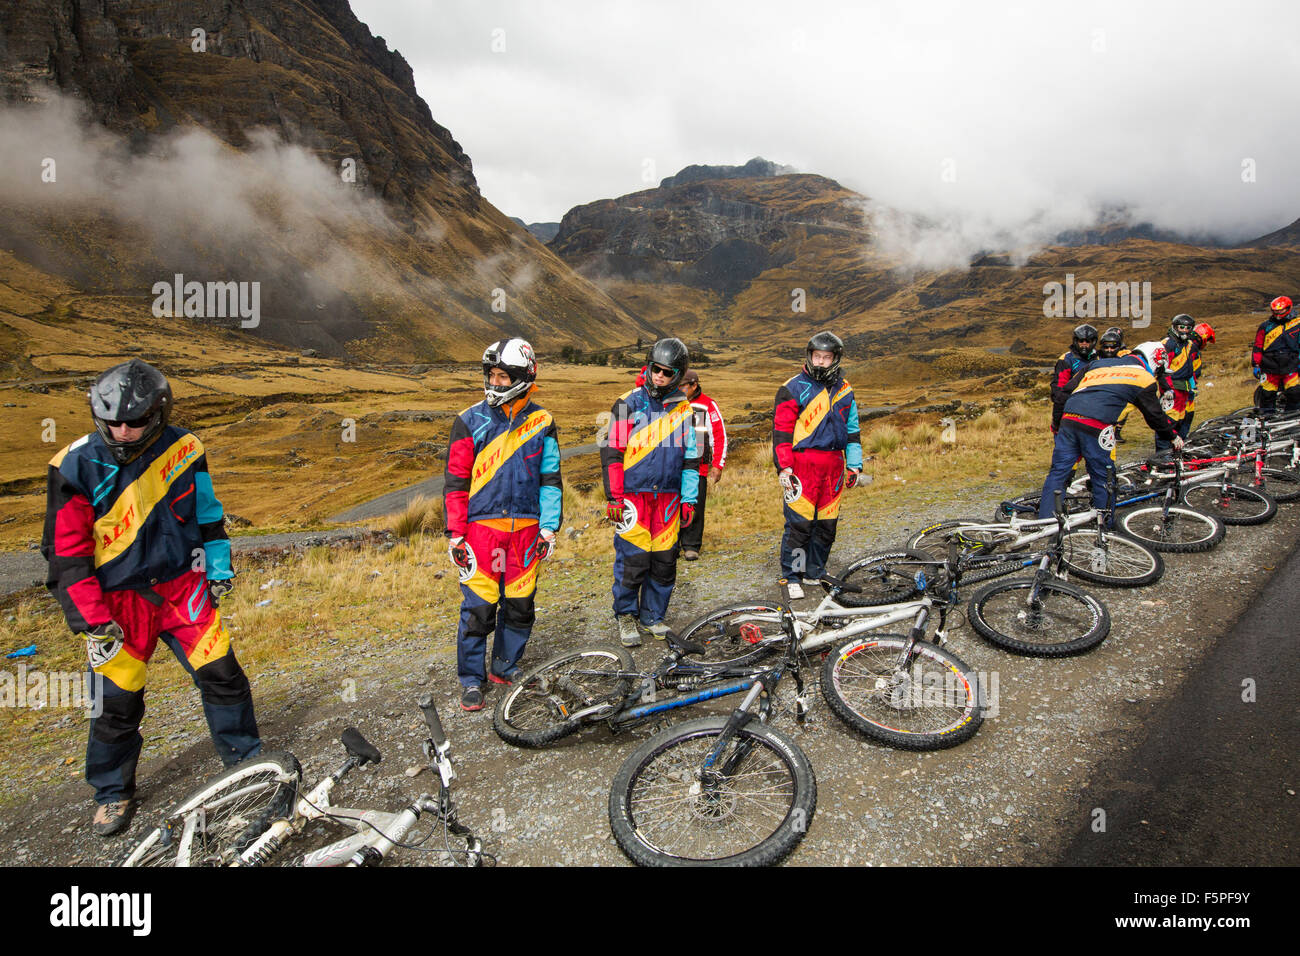 Tourists prepare to descend the infamous Death Road, near La Paz in Bolivia. It is reputedly the most dangerous road on the planet. A gravel track barely wide enough for two vehicles with drops of 3000 feet on one side. It has become a popular tourist trip to descend the road on mountain bikes. Stock Photo